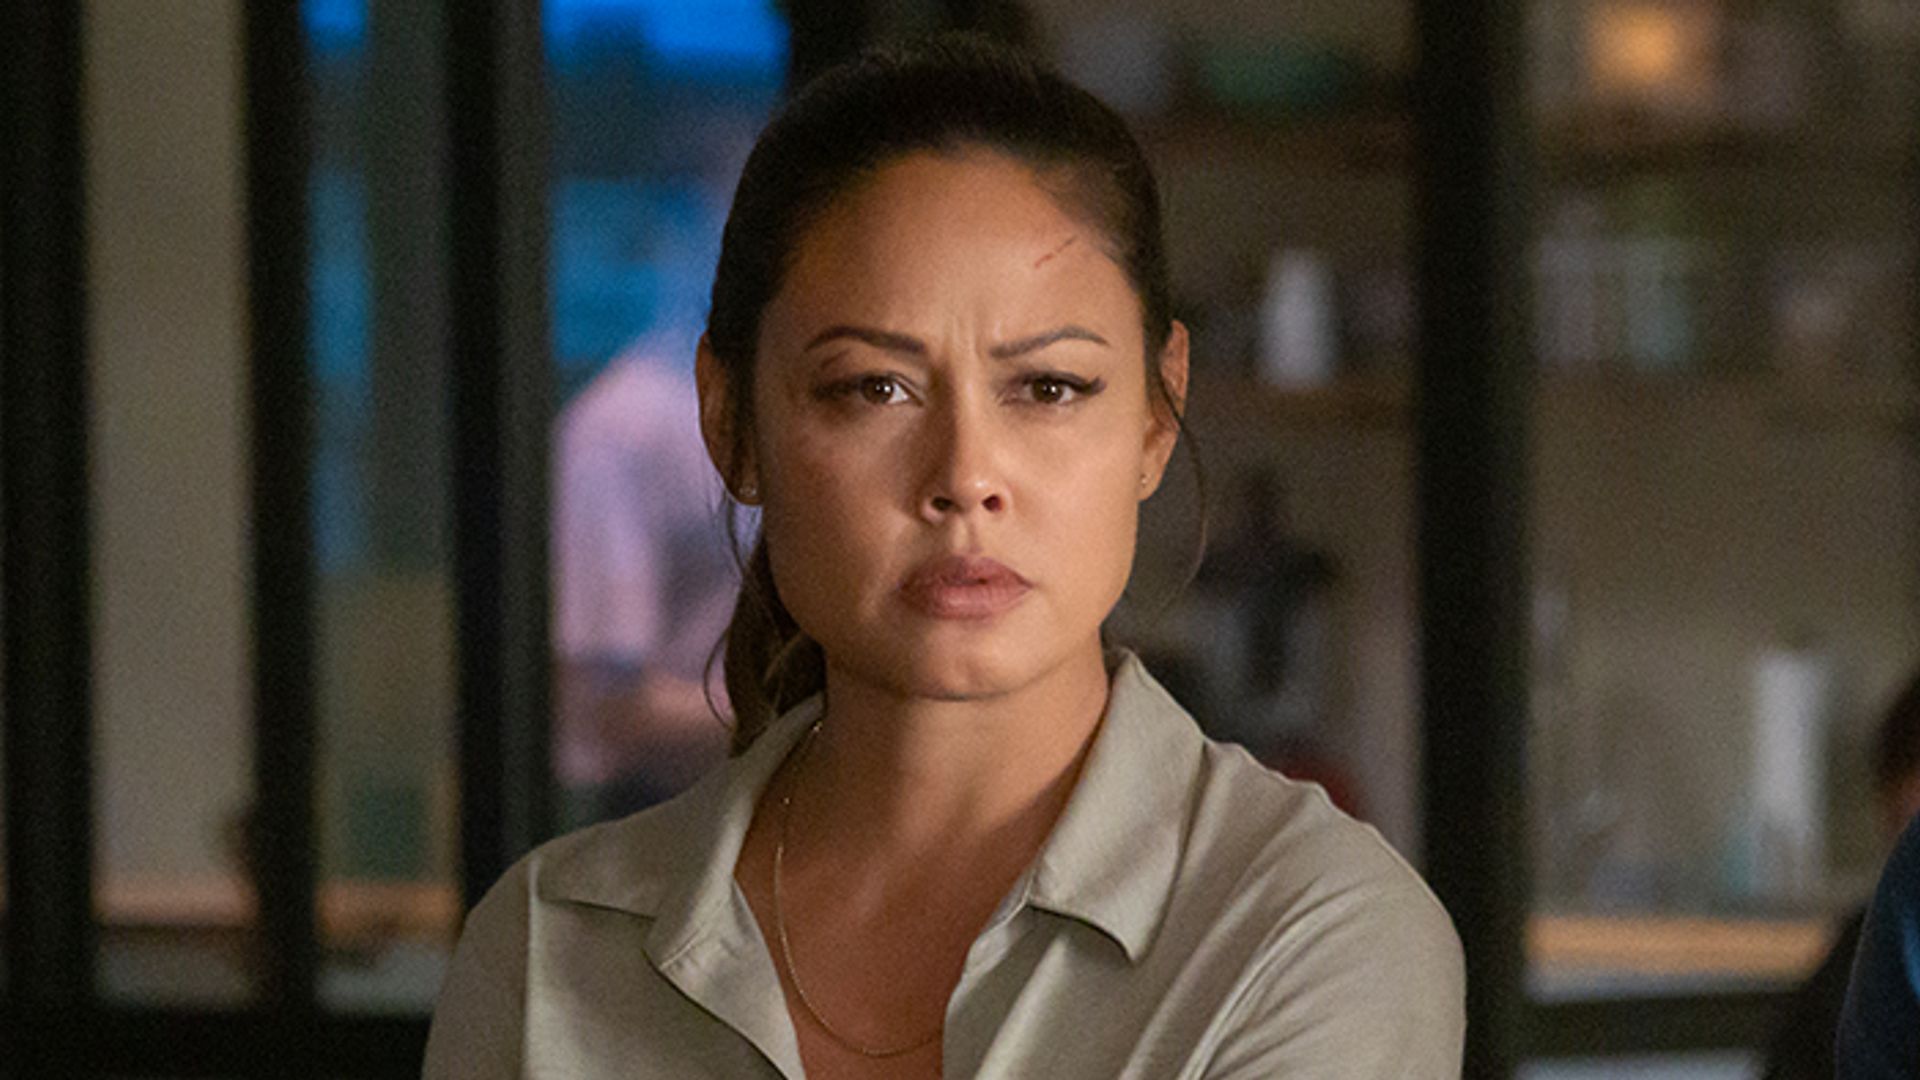 Vanessa Lachey posts heartbreaking message to NCIS: Hawai'i fans as series ends on cliffhanger